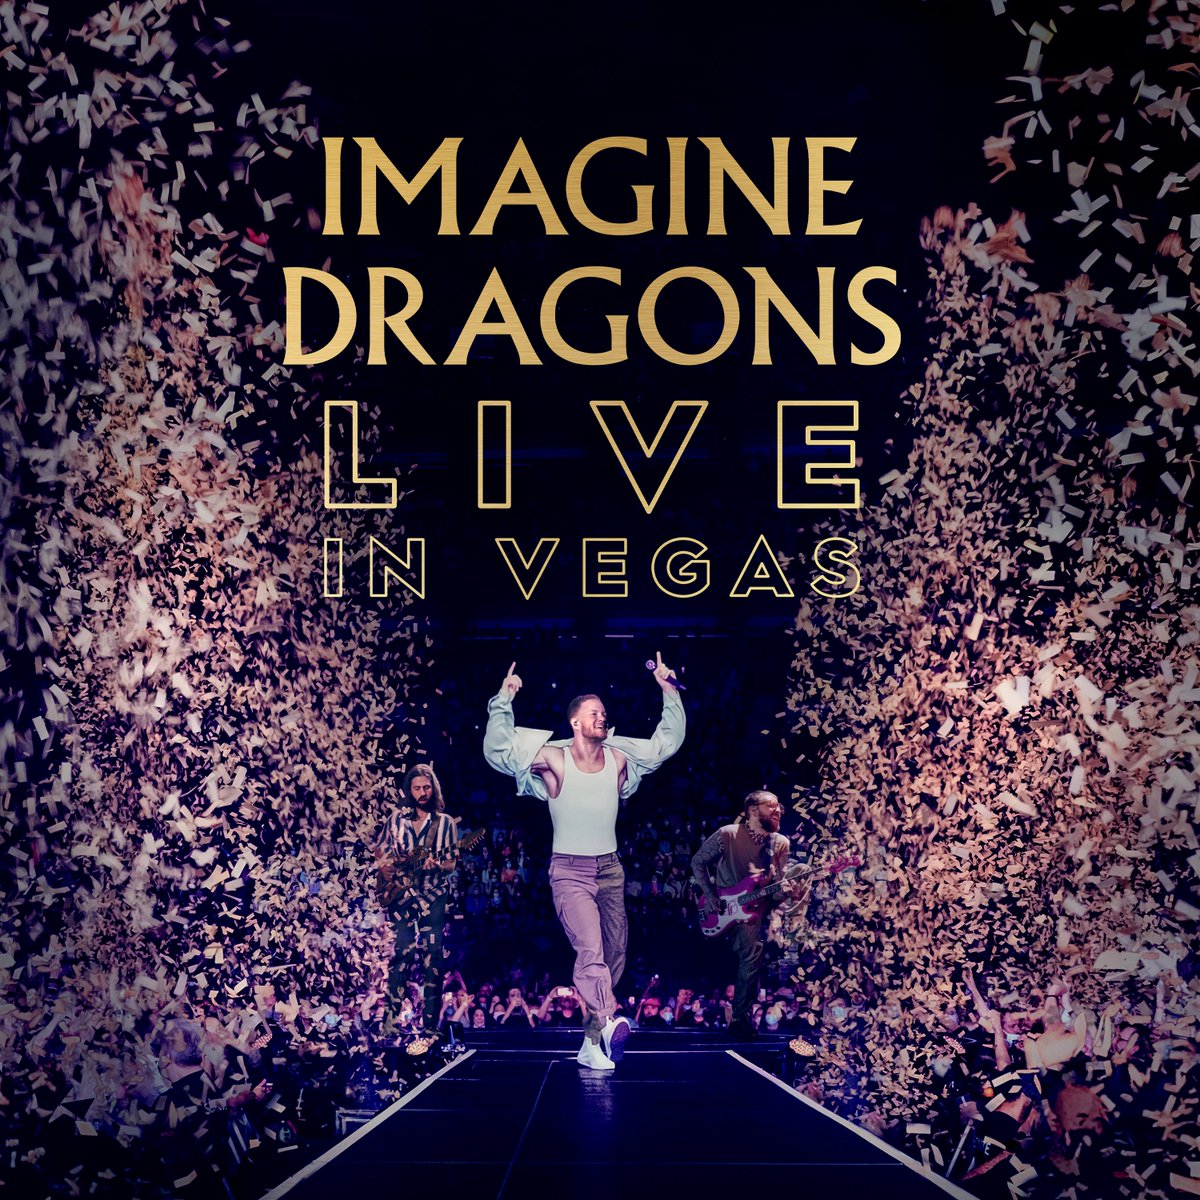 Imagine Dragons Live in Vegas. the live album. 
out this friday. #ImagineDragonsLiveinVegas